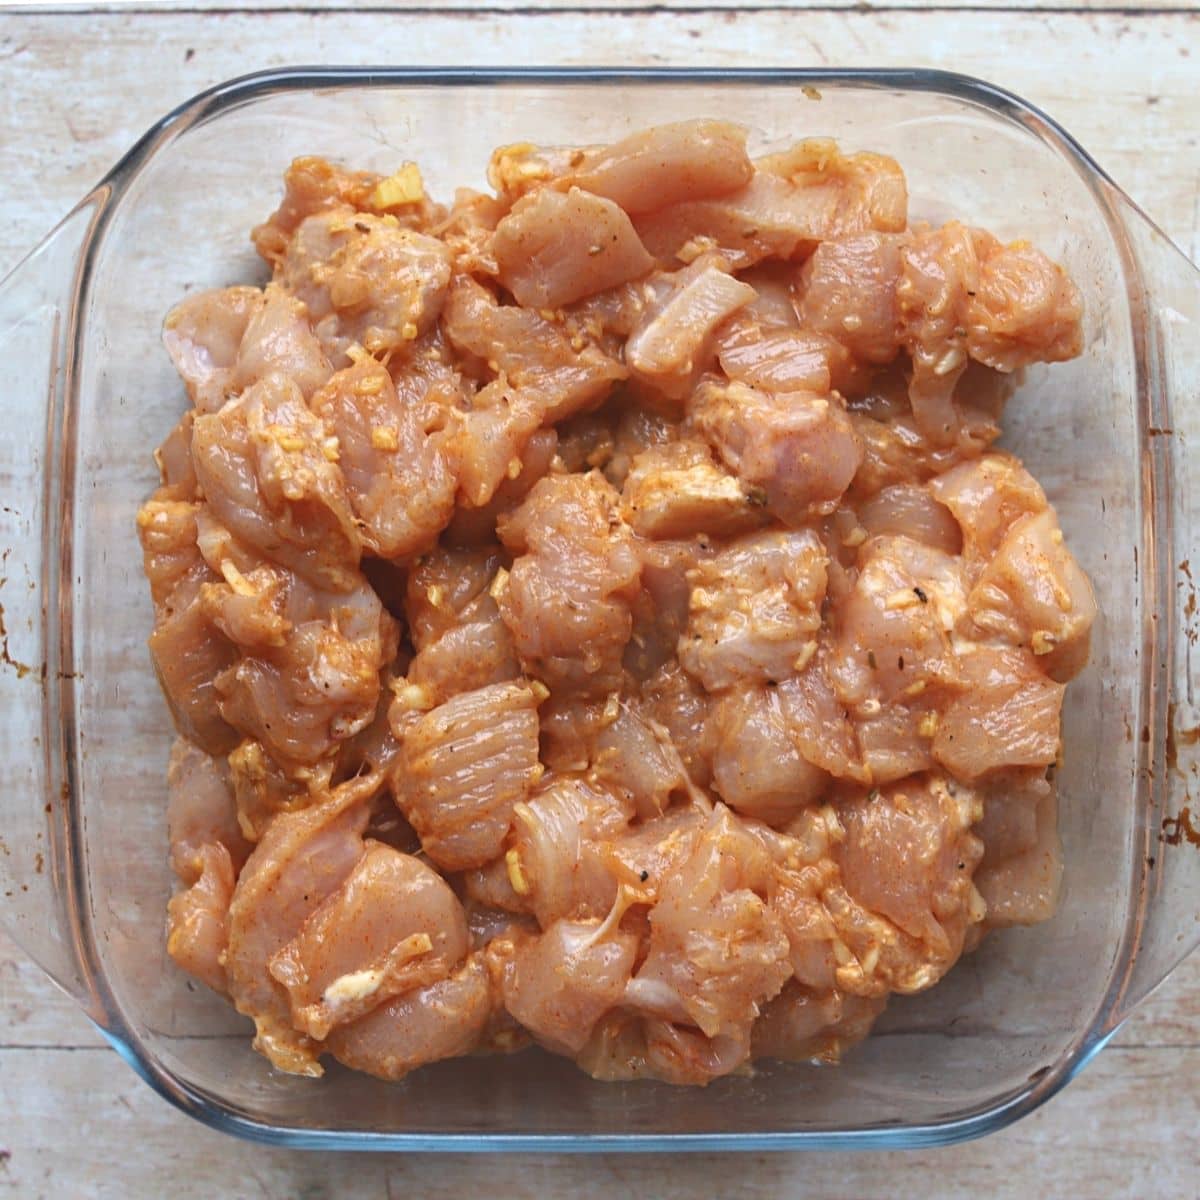 Raw chicken marinating in a glass bowl.